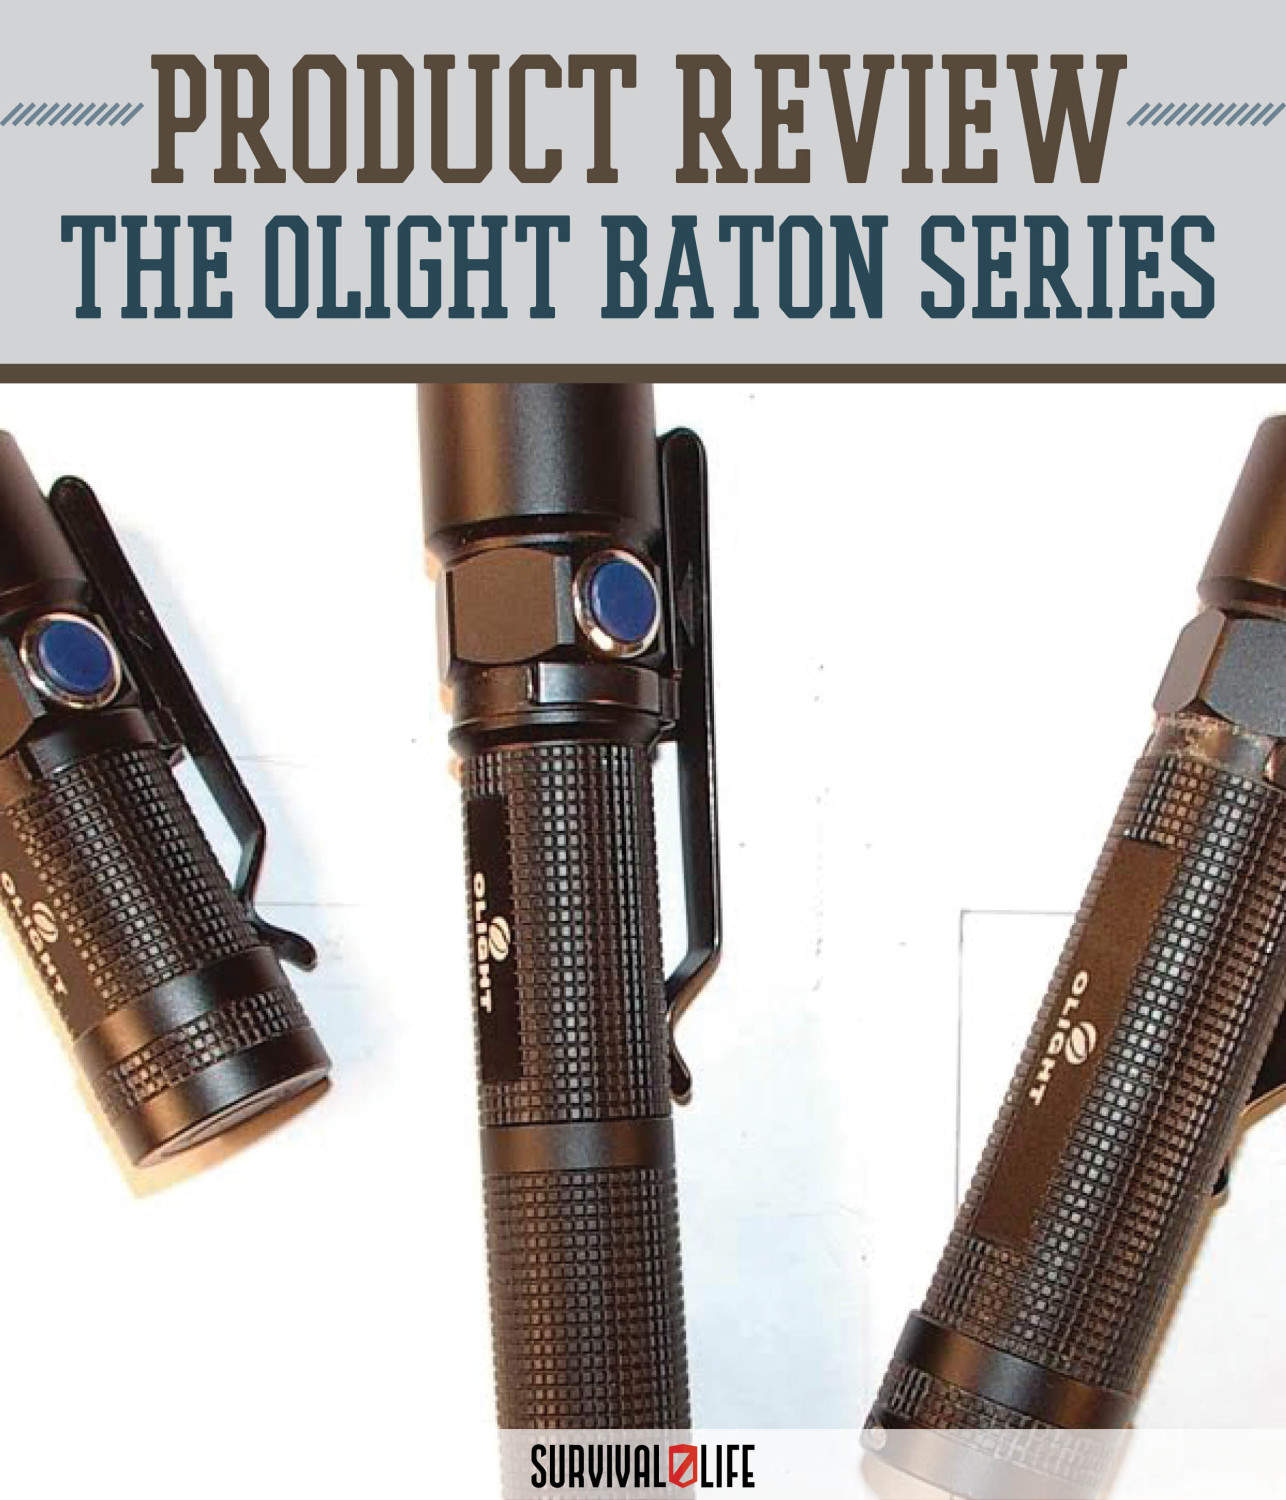 Product Review: Olight Baton S10, S15 and S20 by Survival Life at http://survivallife.com/2015/05/08/product-review-olight-baton/